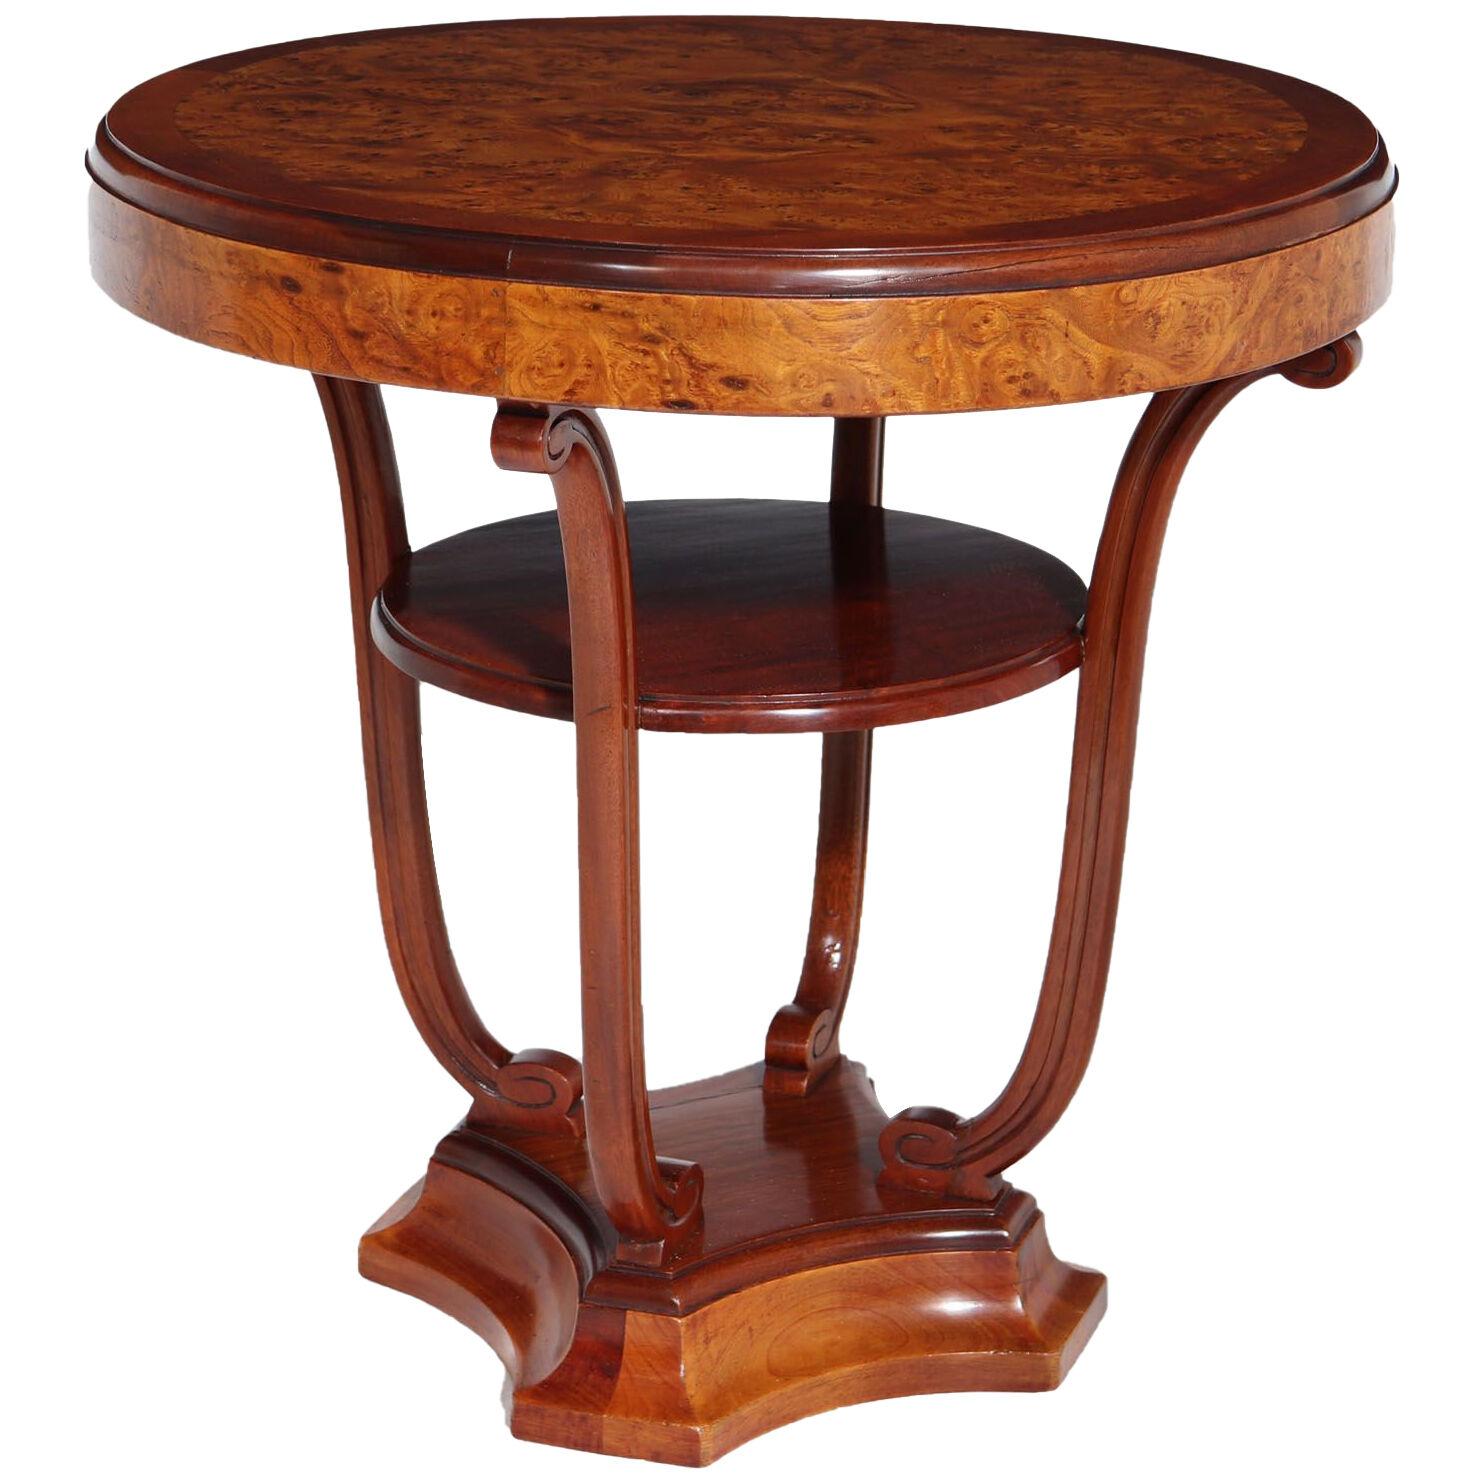 FRENCH ART DECO COFFEE CENTER TABLE BY MAURICE DUFRENE